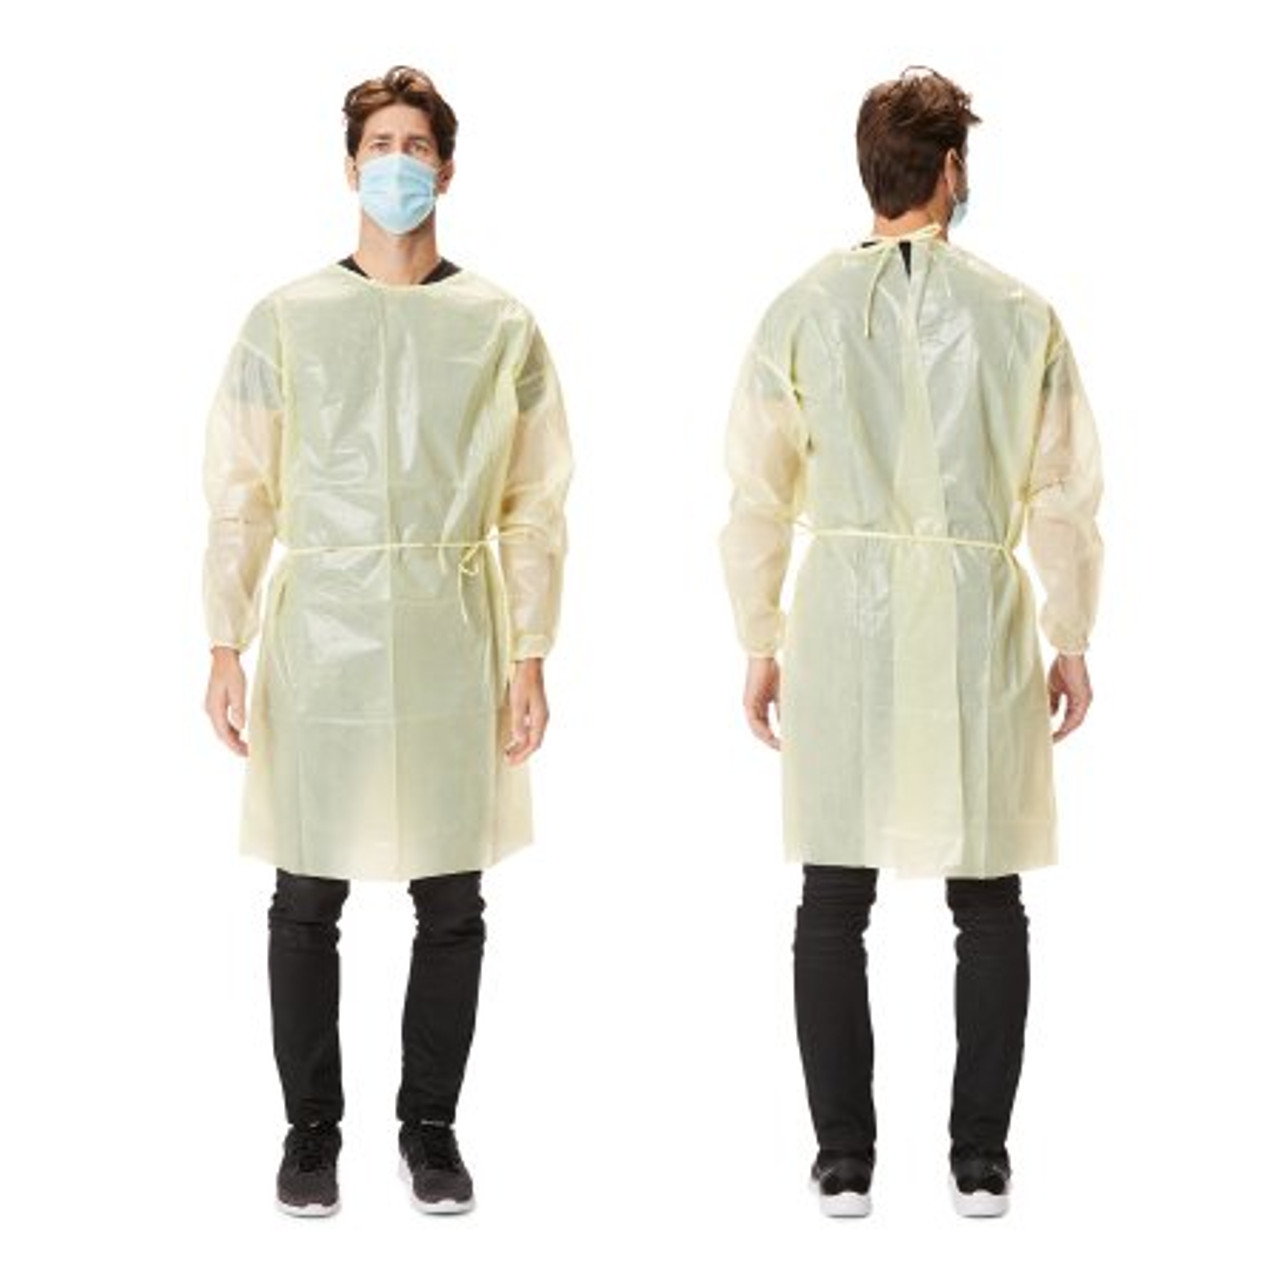 Isolation Gown - Disposable CPE isolation gown AAMI level 1 standard